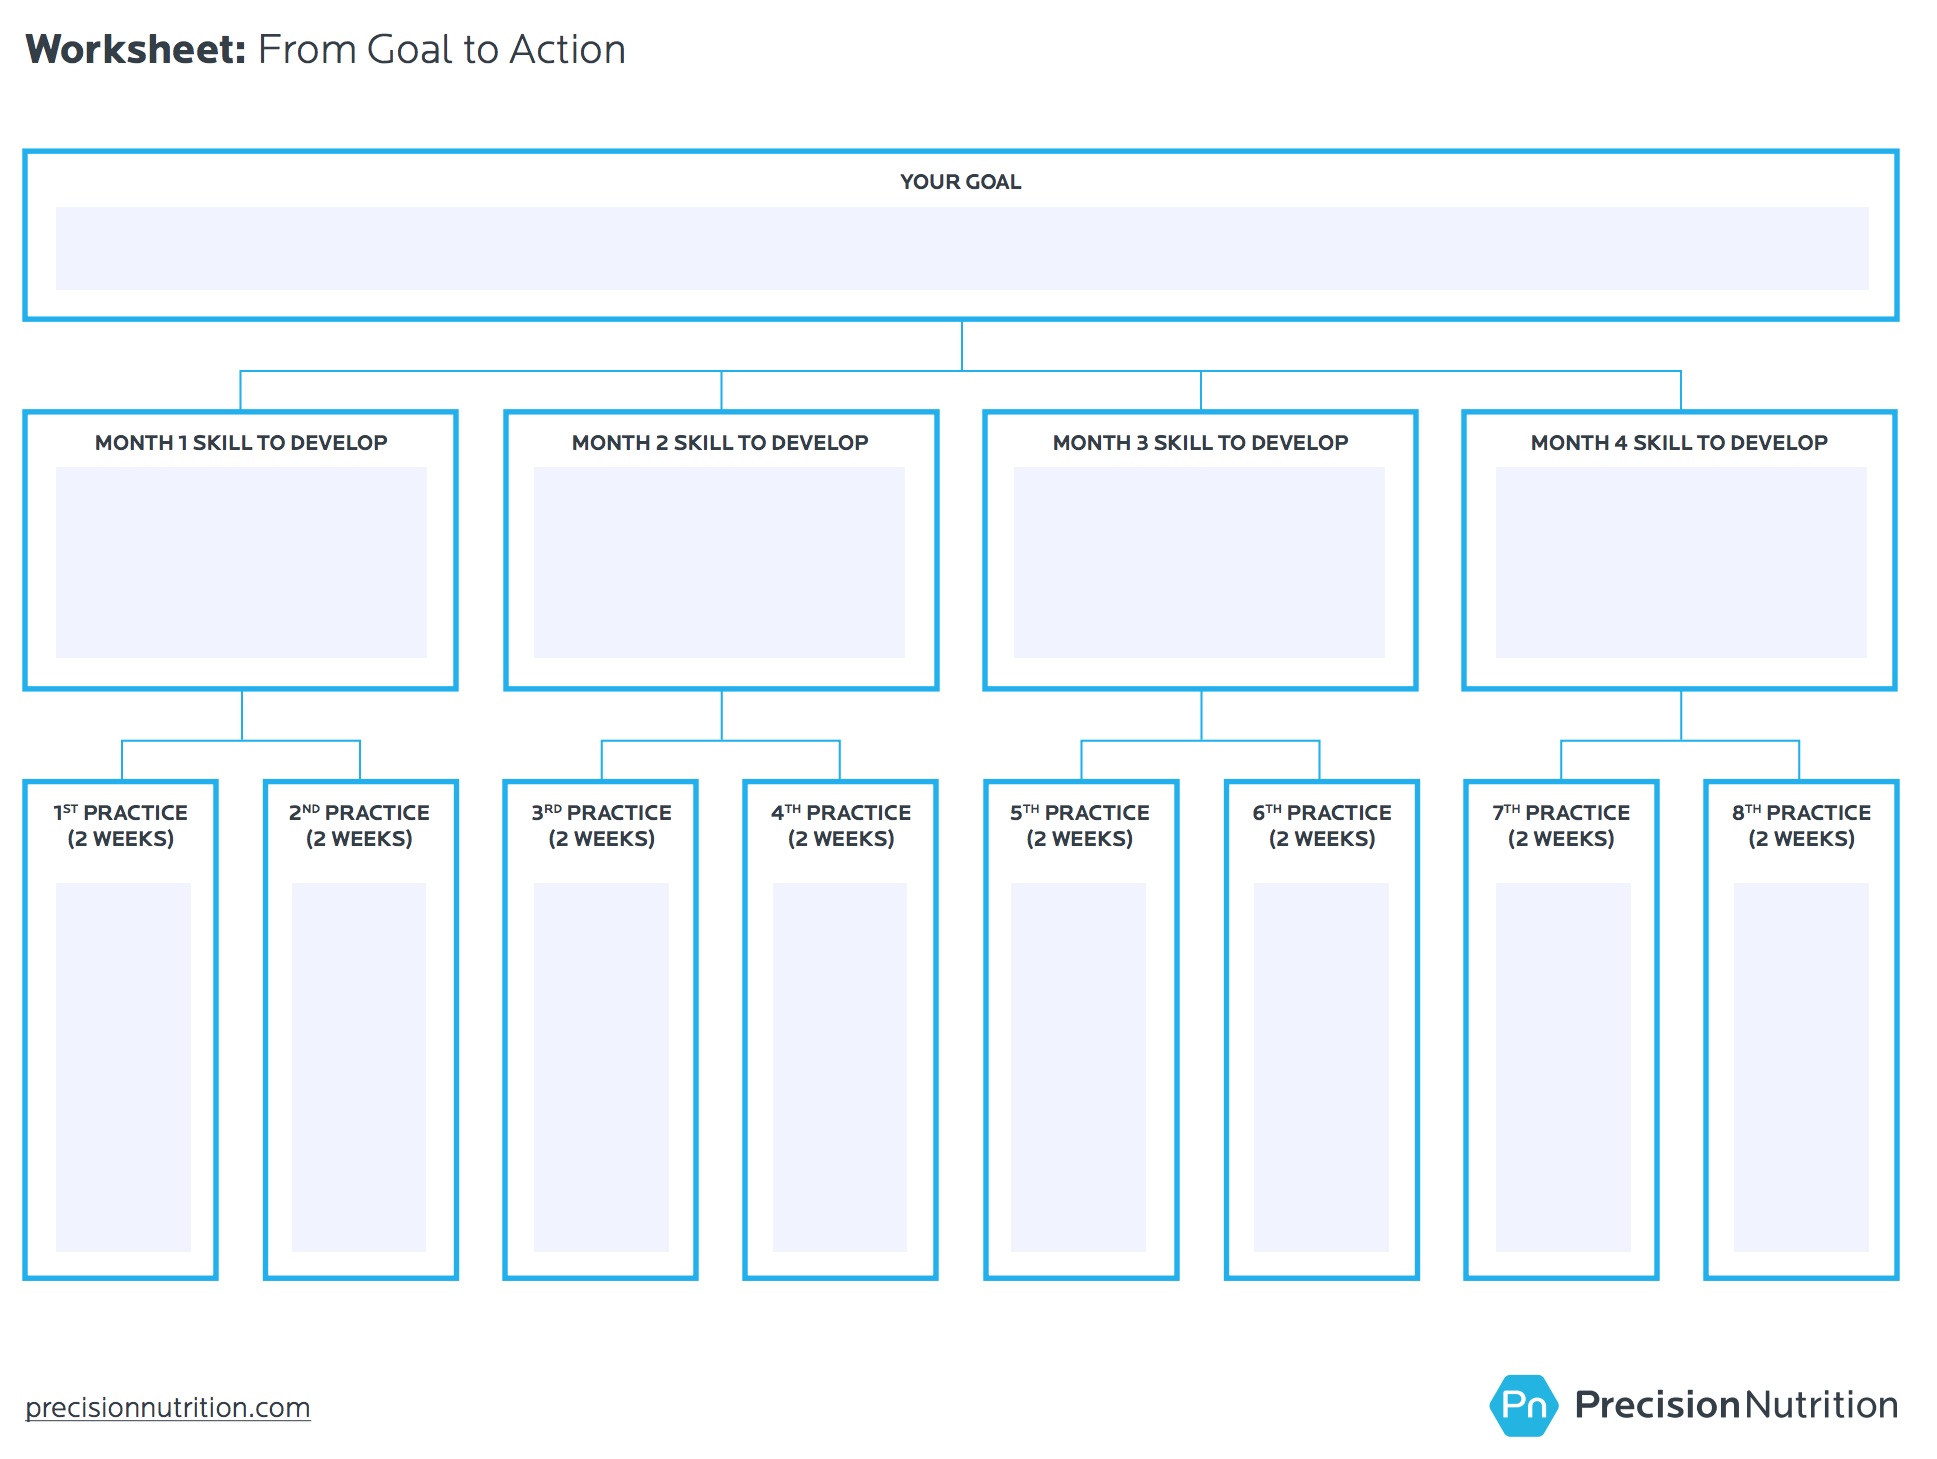 worksheet-goal-to-action